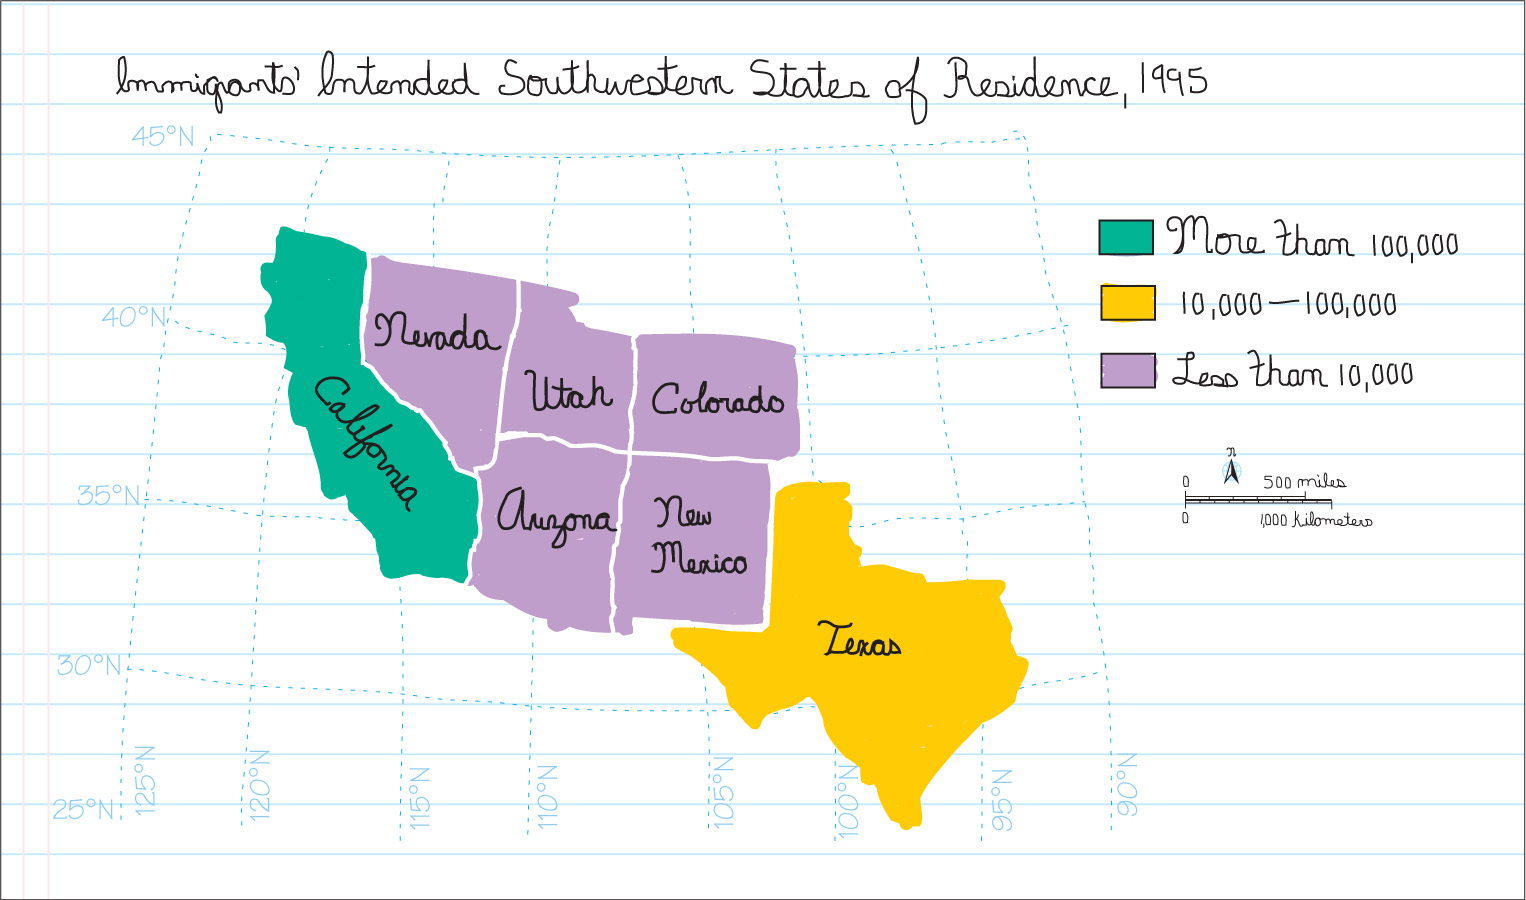 A hand-drawn map: Immigrants Intended Southwestern States of Residence, 1995.